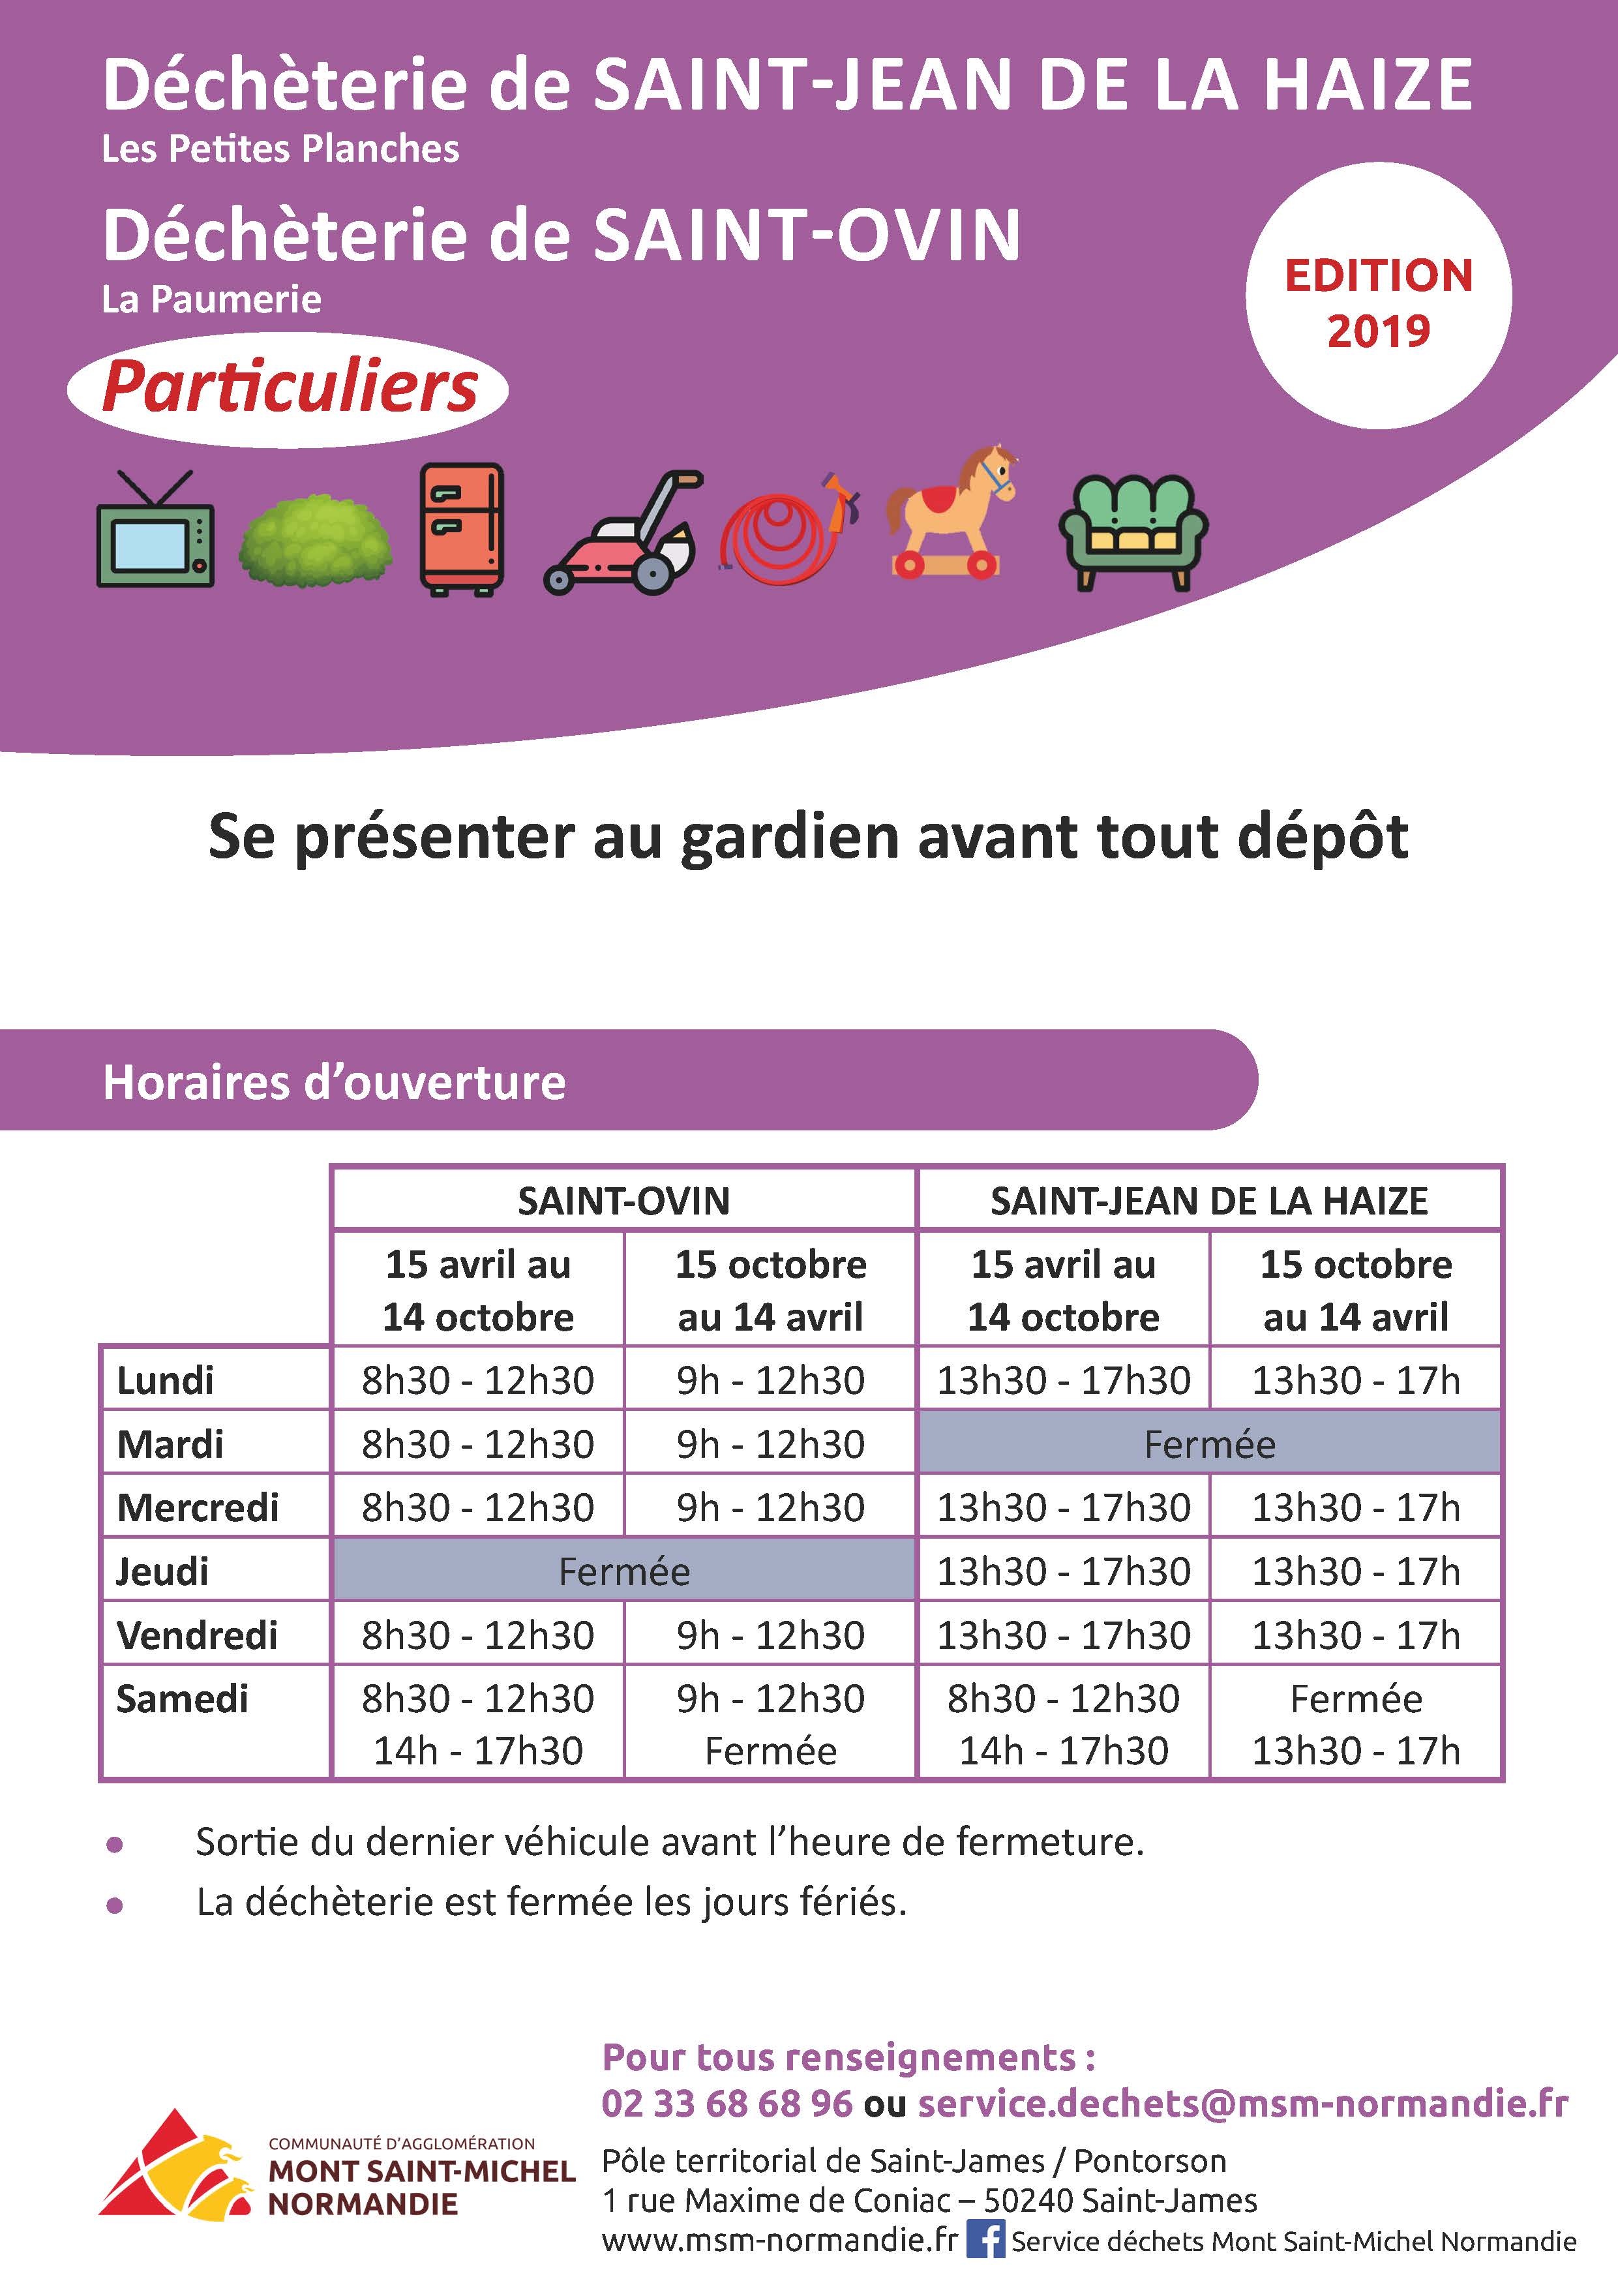 Doc 4 pages particuliers St Ovin St Jean Page 1